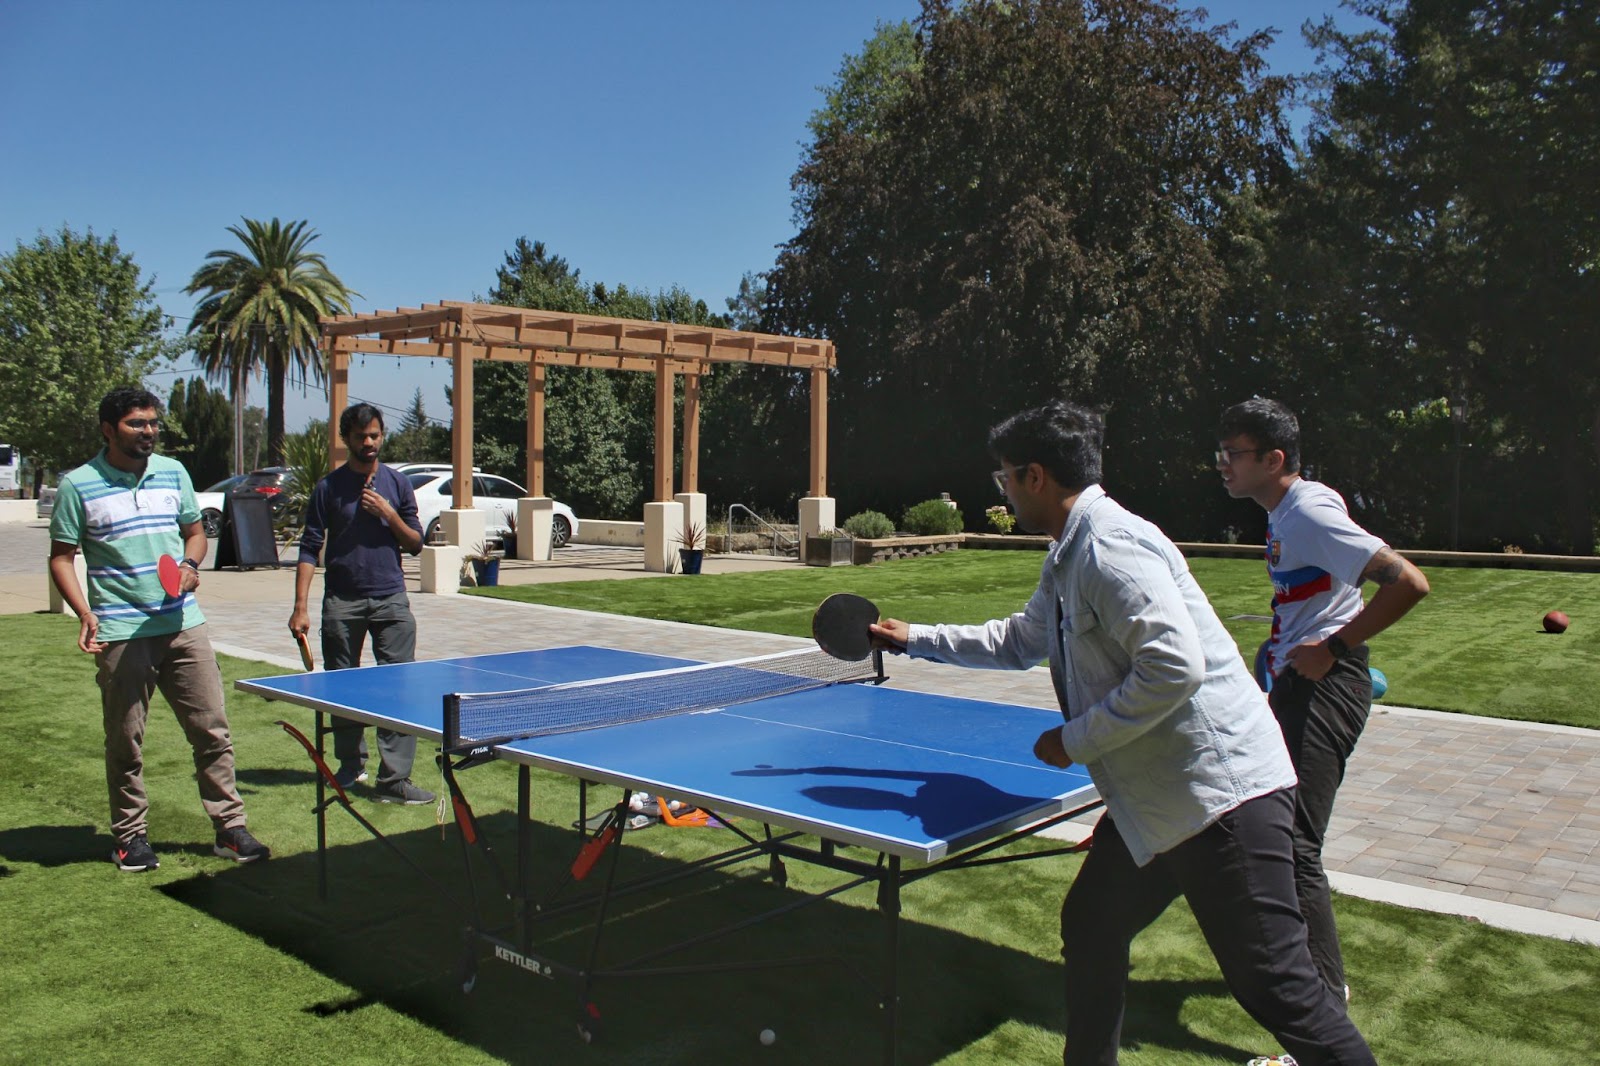 Four residents at the retreat are playing ping-pong or table tennis outdoors. They look very focused.